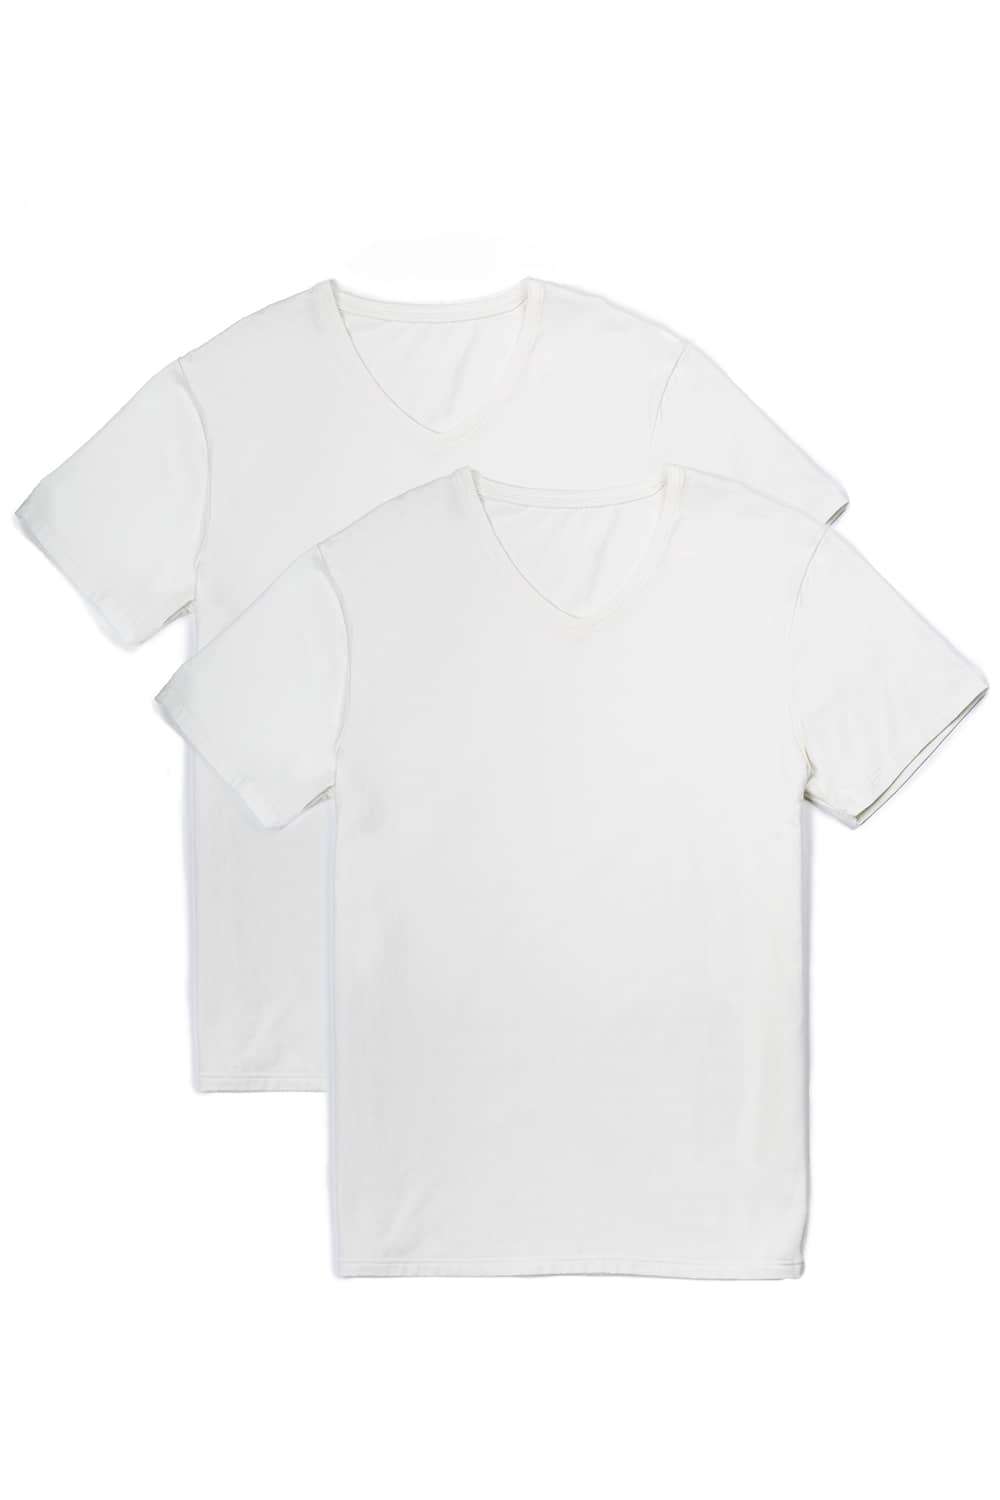 Men's Classic Fit Soft Stretch V-Neck Undershirt Mens>Casual>Tops Fishers Finery White Small 2 Pack